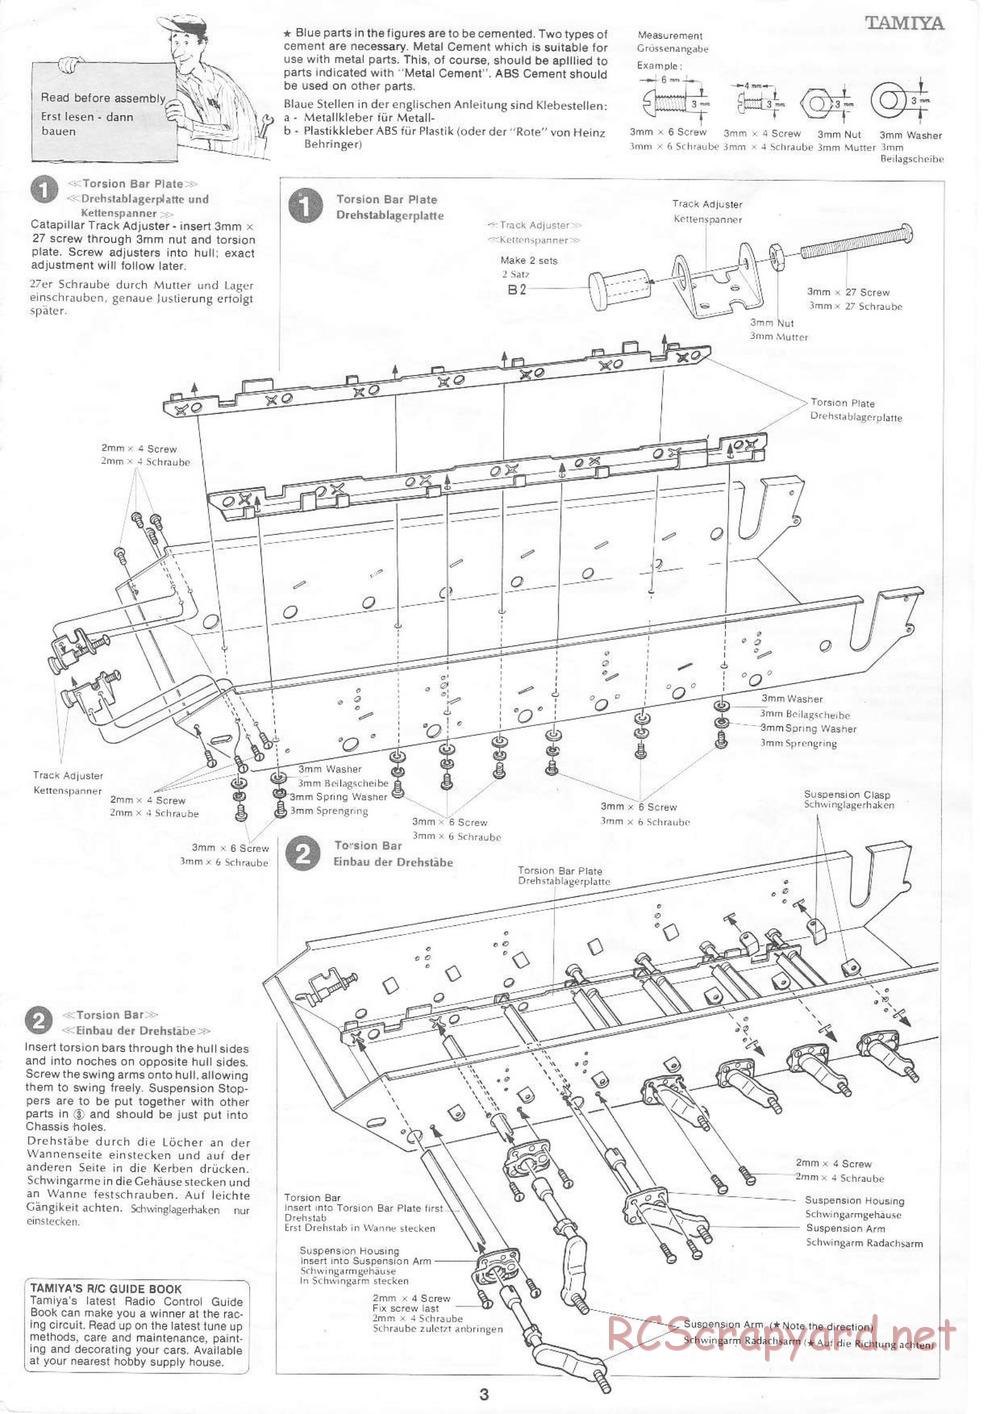 Tamiya - Leopard A4 - 1/16 Scale Chassis - Manual - Page 3